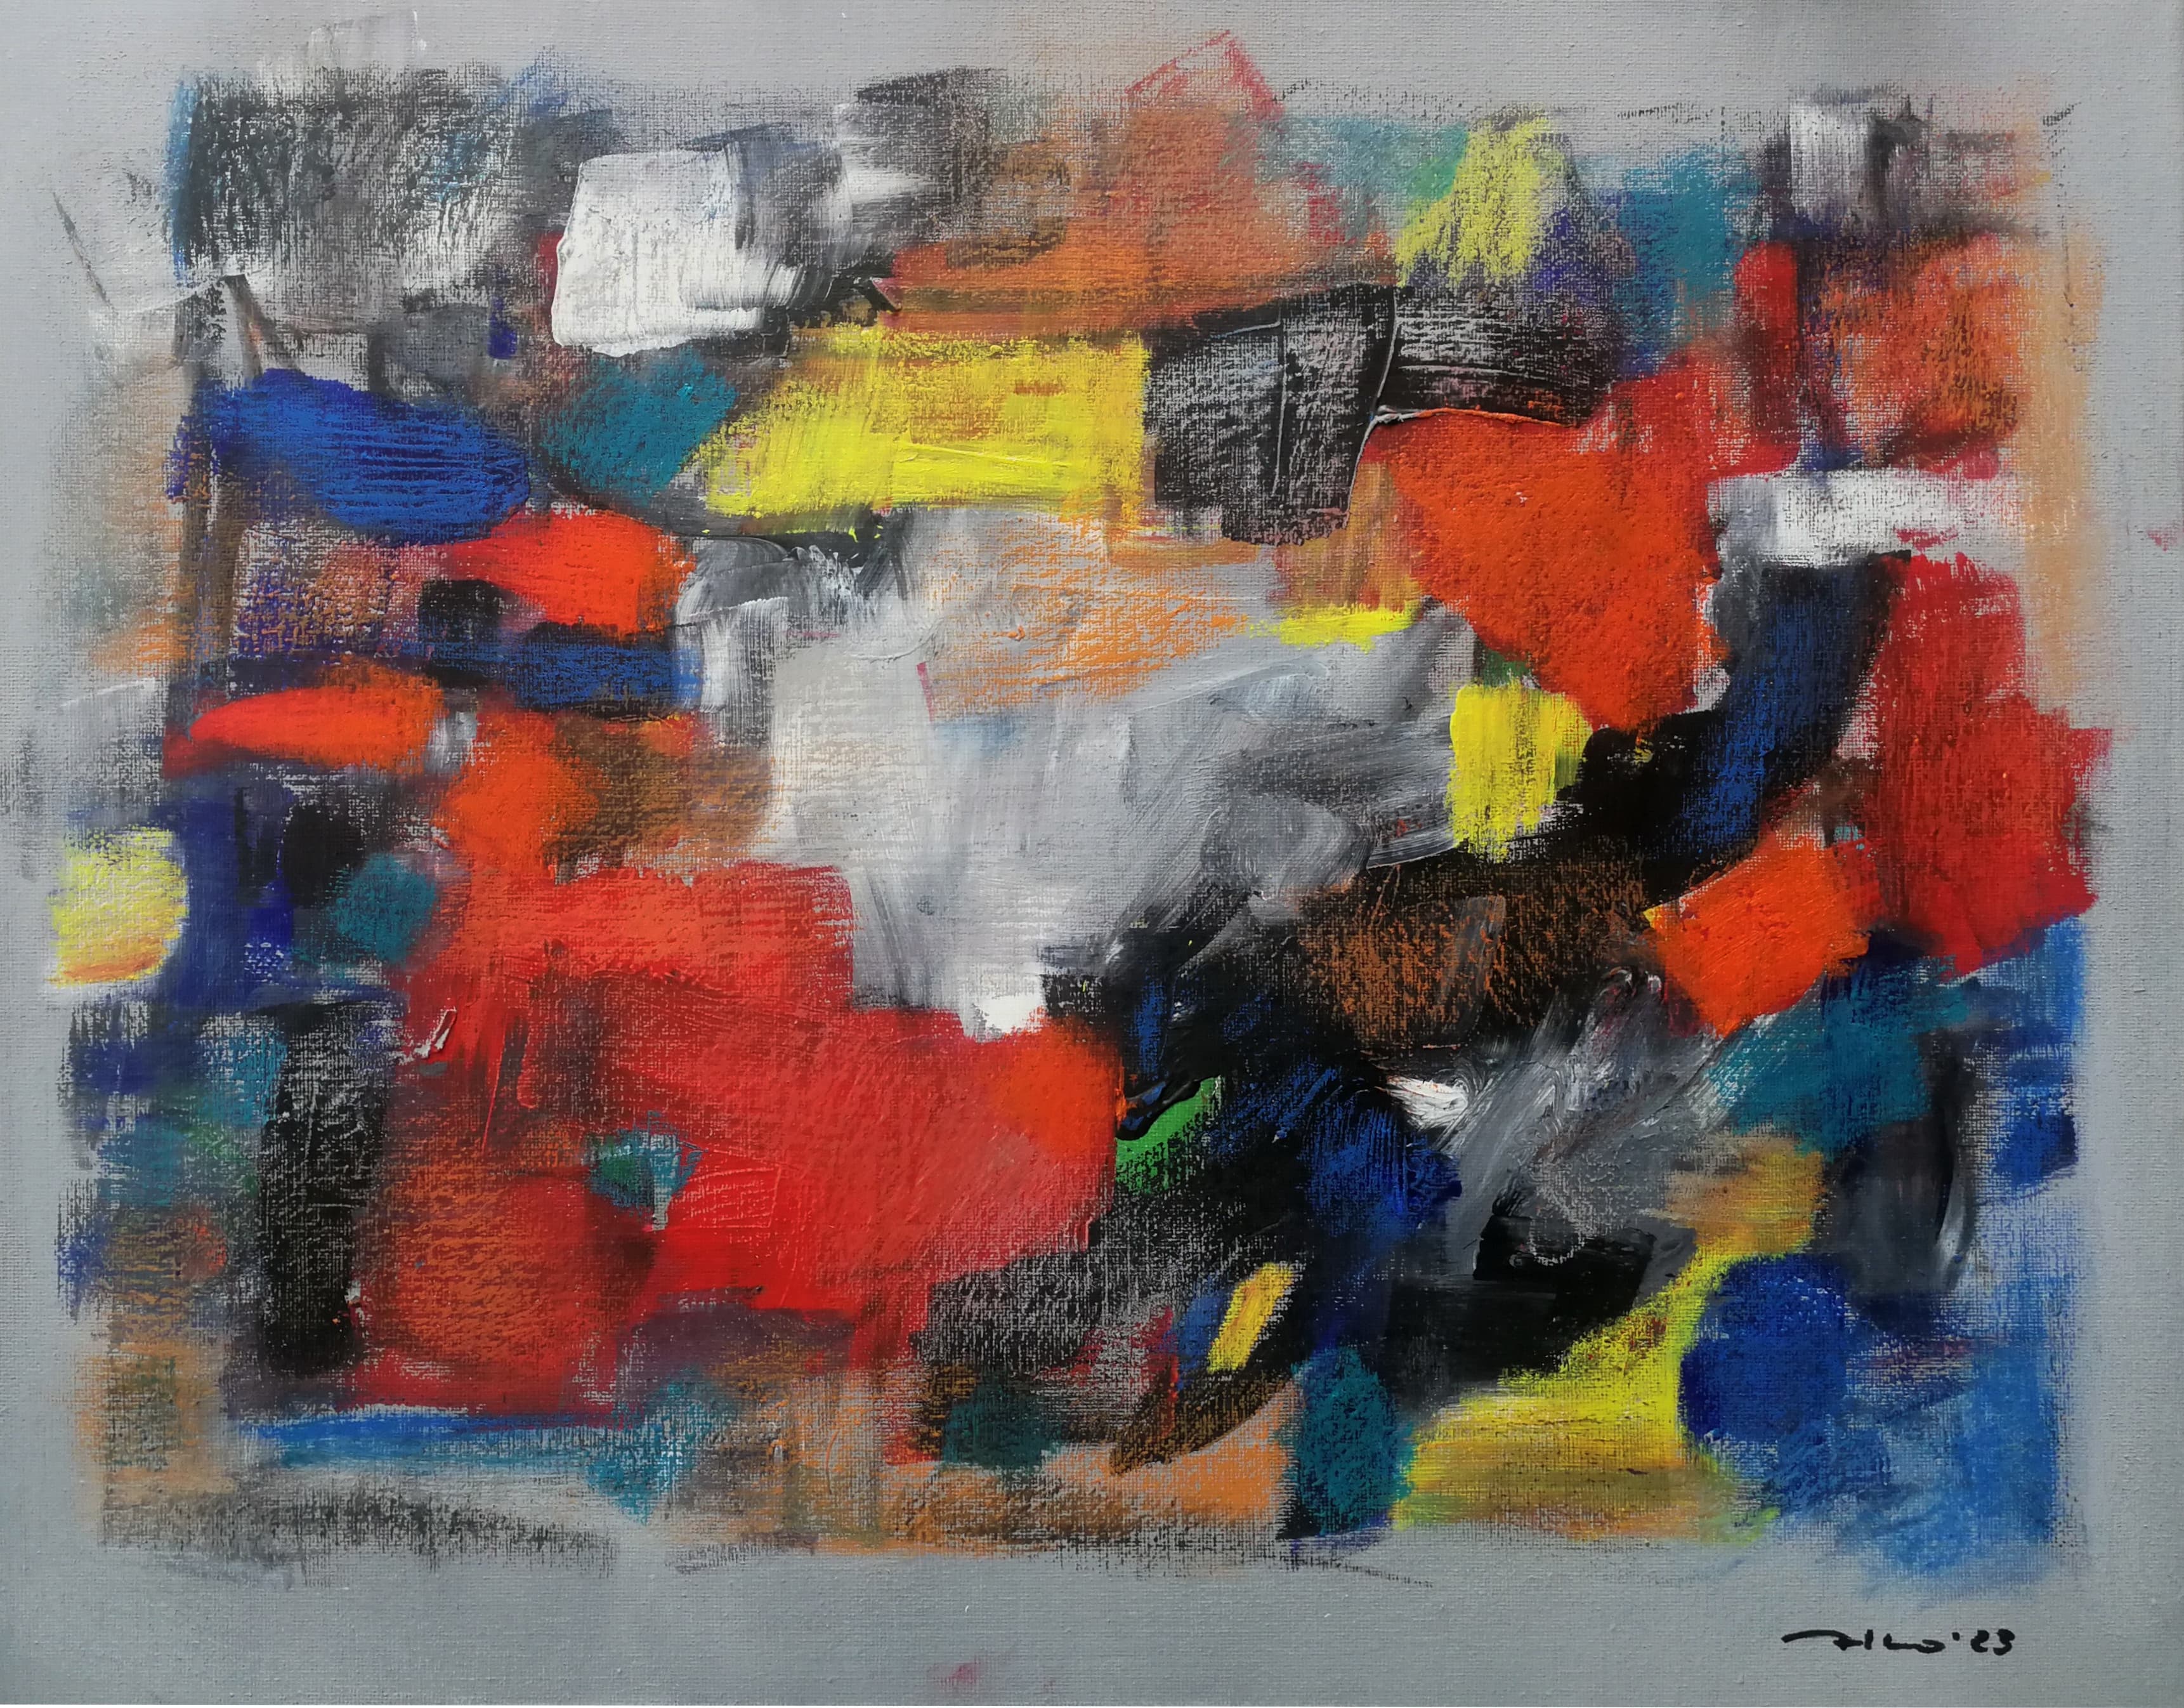 Do Not Trust Anyone - Colourful Abstract Oil Painting